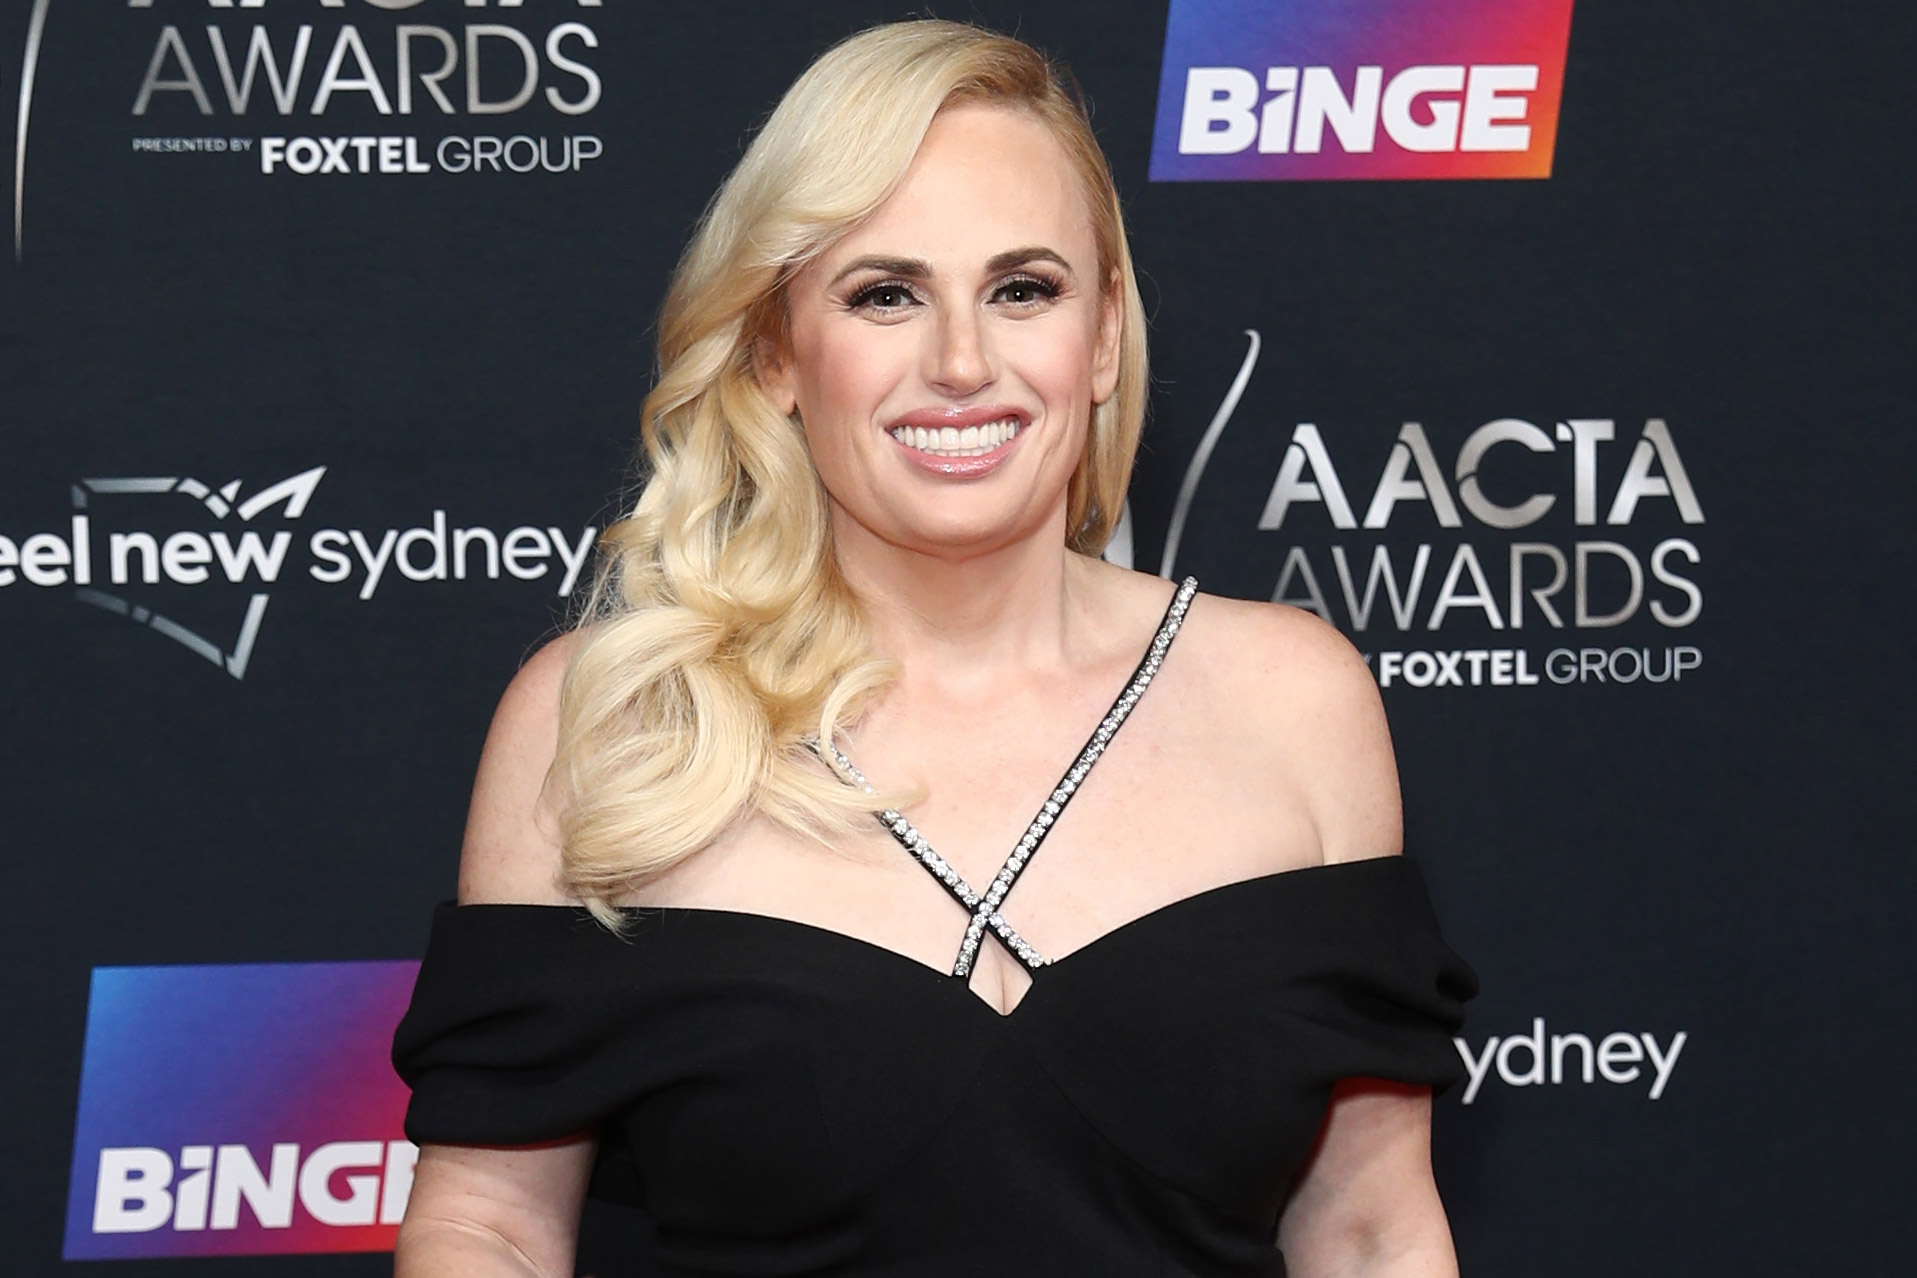 SYDNEY, AUSTRALIA - DECEMBER 07: Rebel Wilson attends the 2022 AACTA Awards Presented at the Hordern on December 07, 2022 in Sydney, Australia. (Photo by Don Arnold/WireImage)